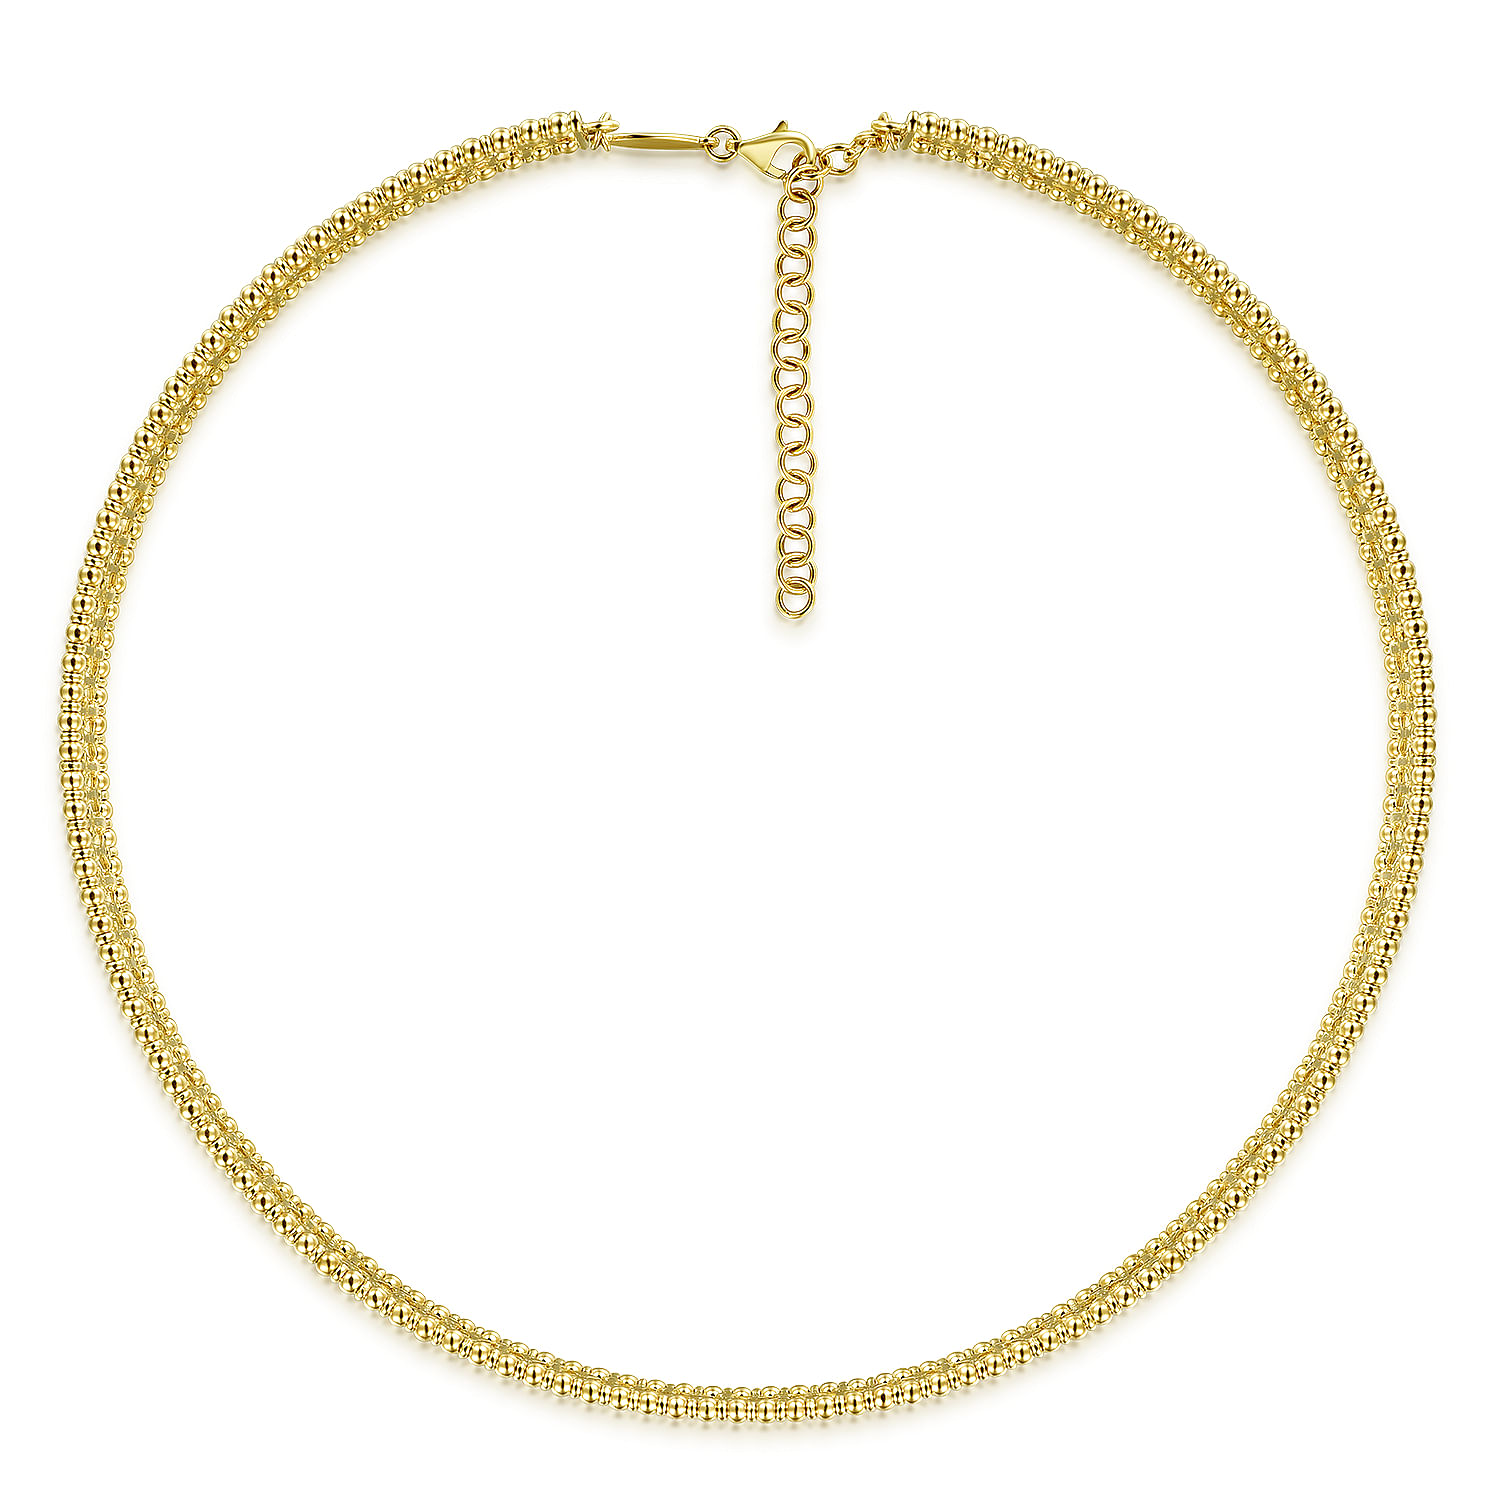 14K Yellow Gold Wide Diamond Station Choker Necklace with Bujukan Beads, 13.5+2 inch